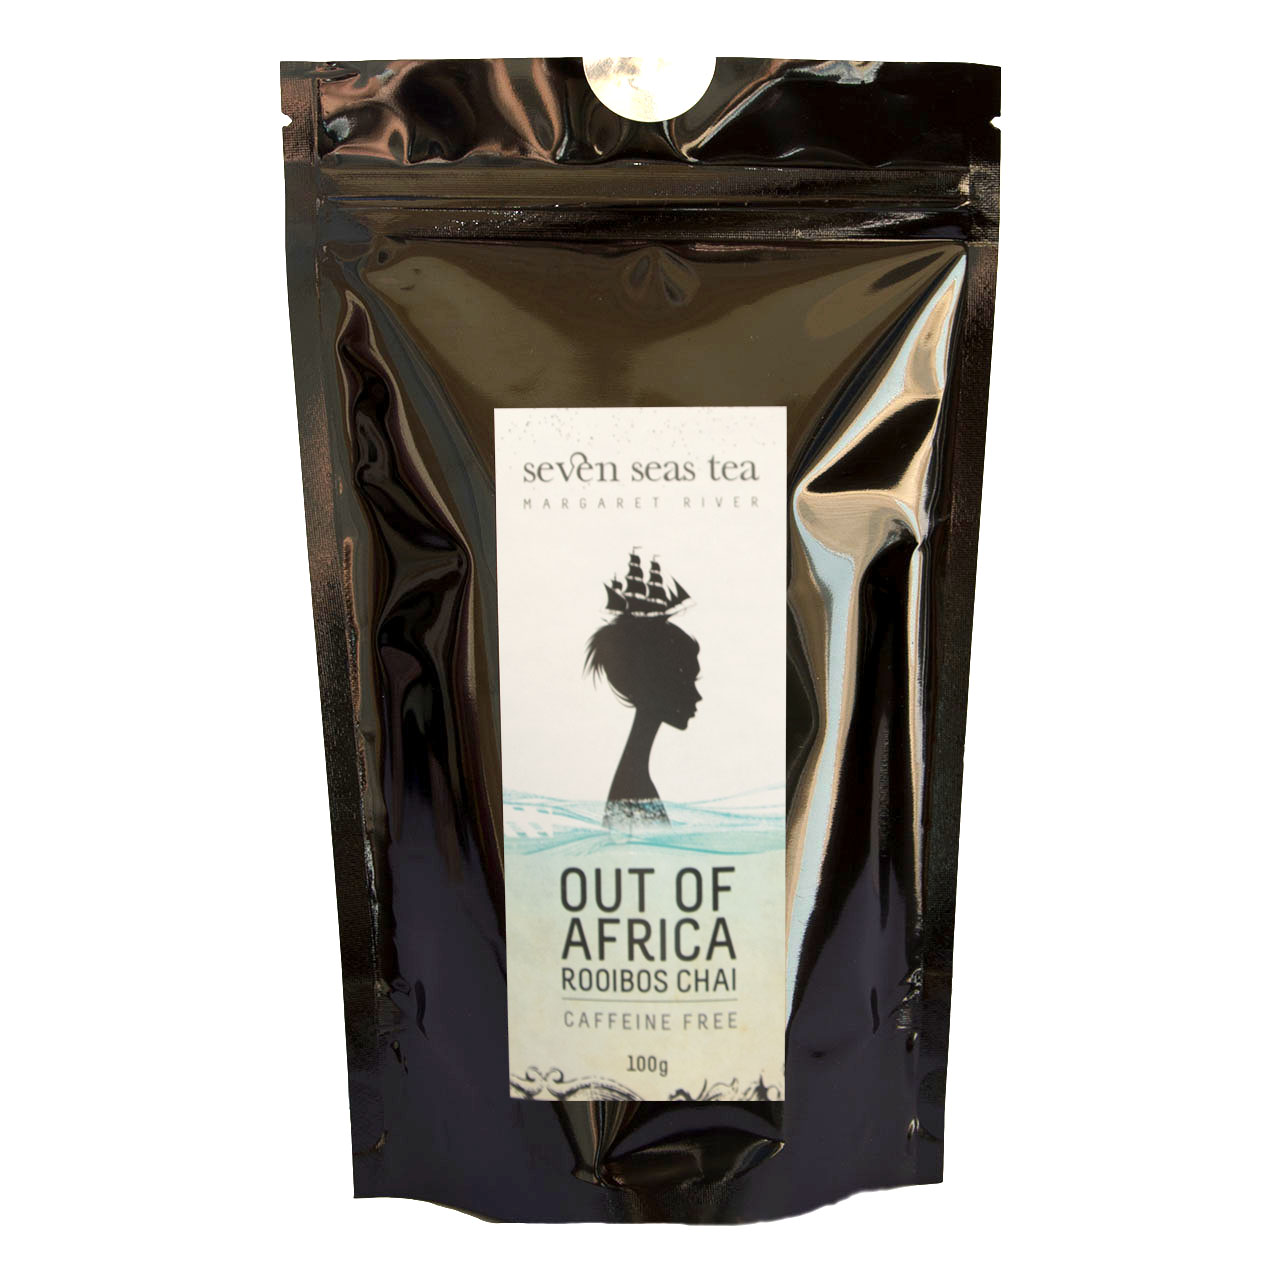 Out of Africa Organic Rooibos Chai